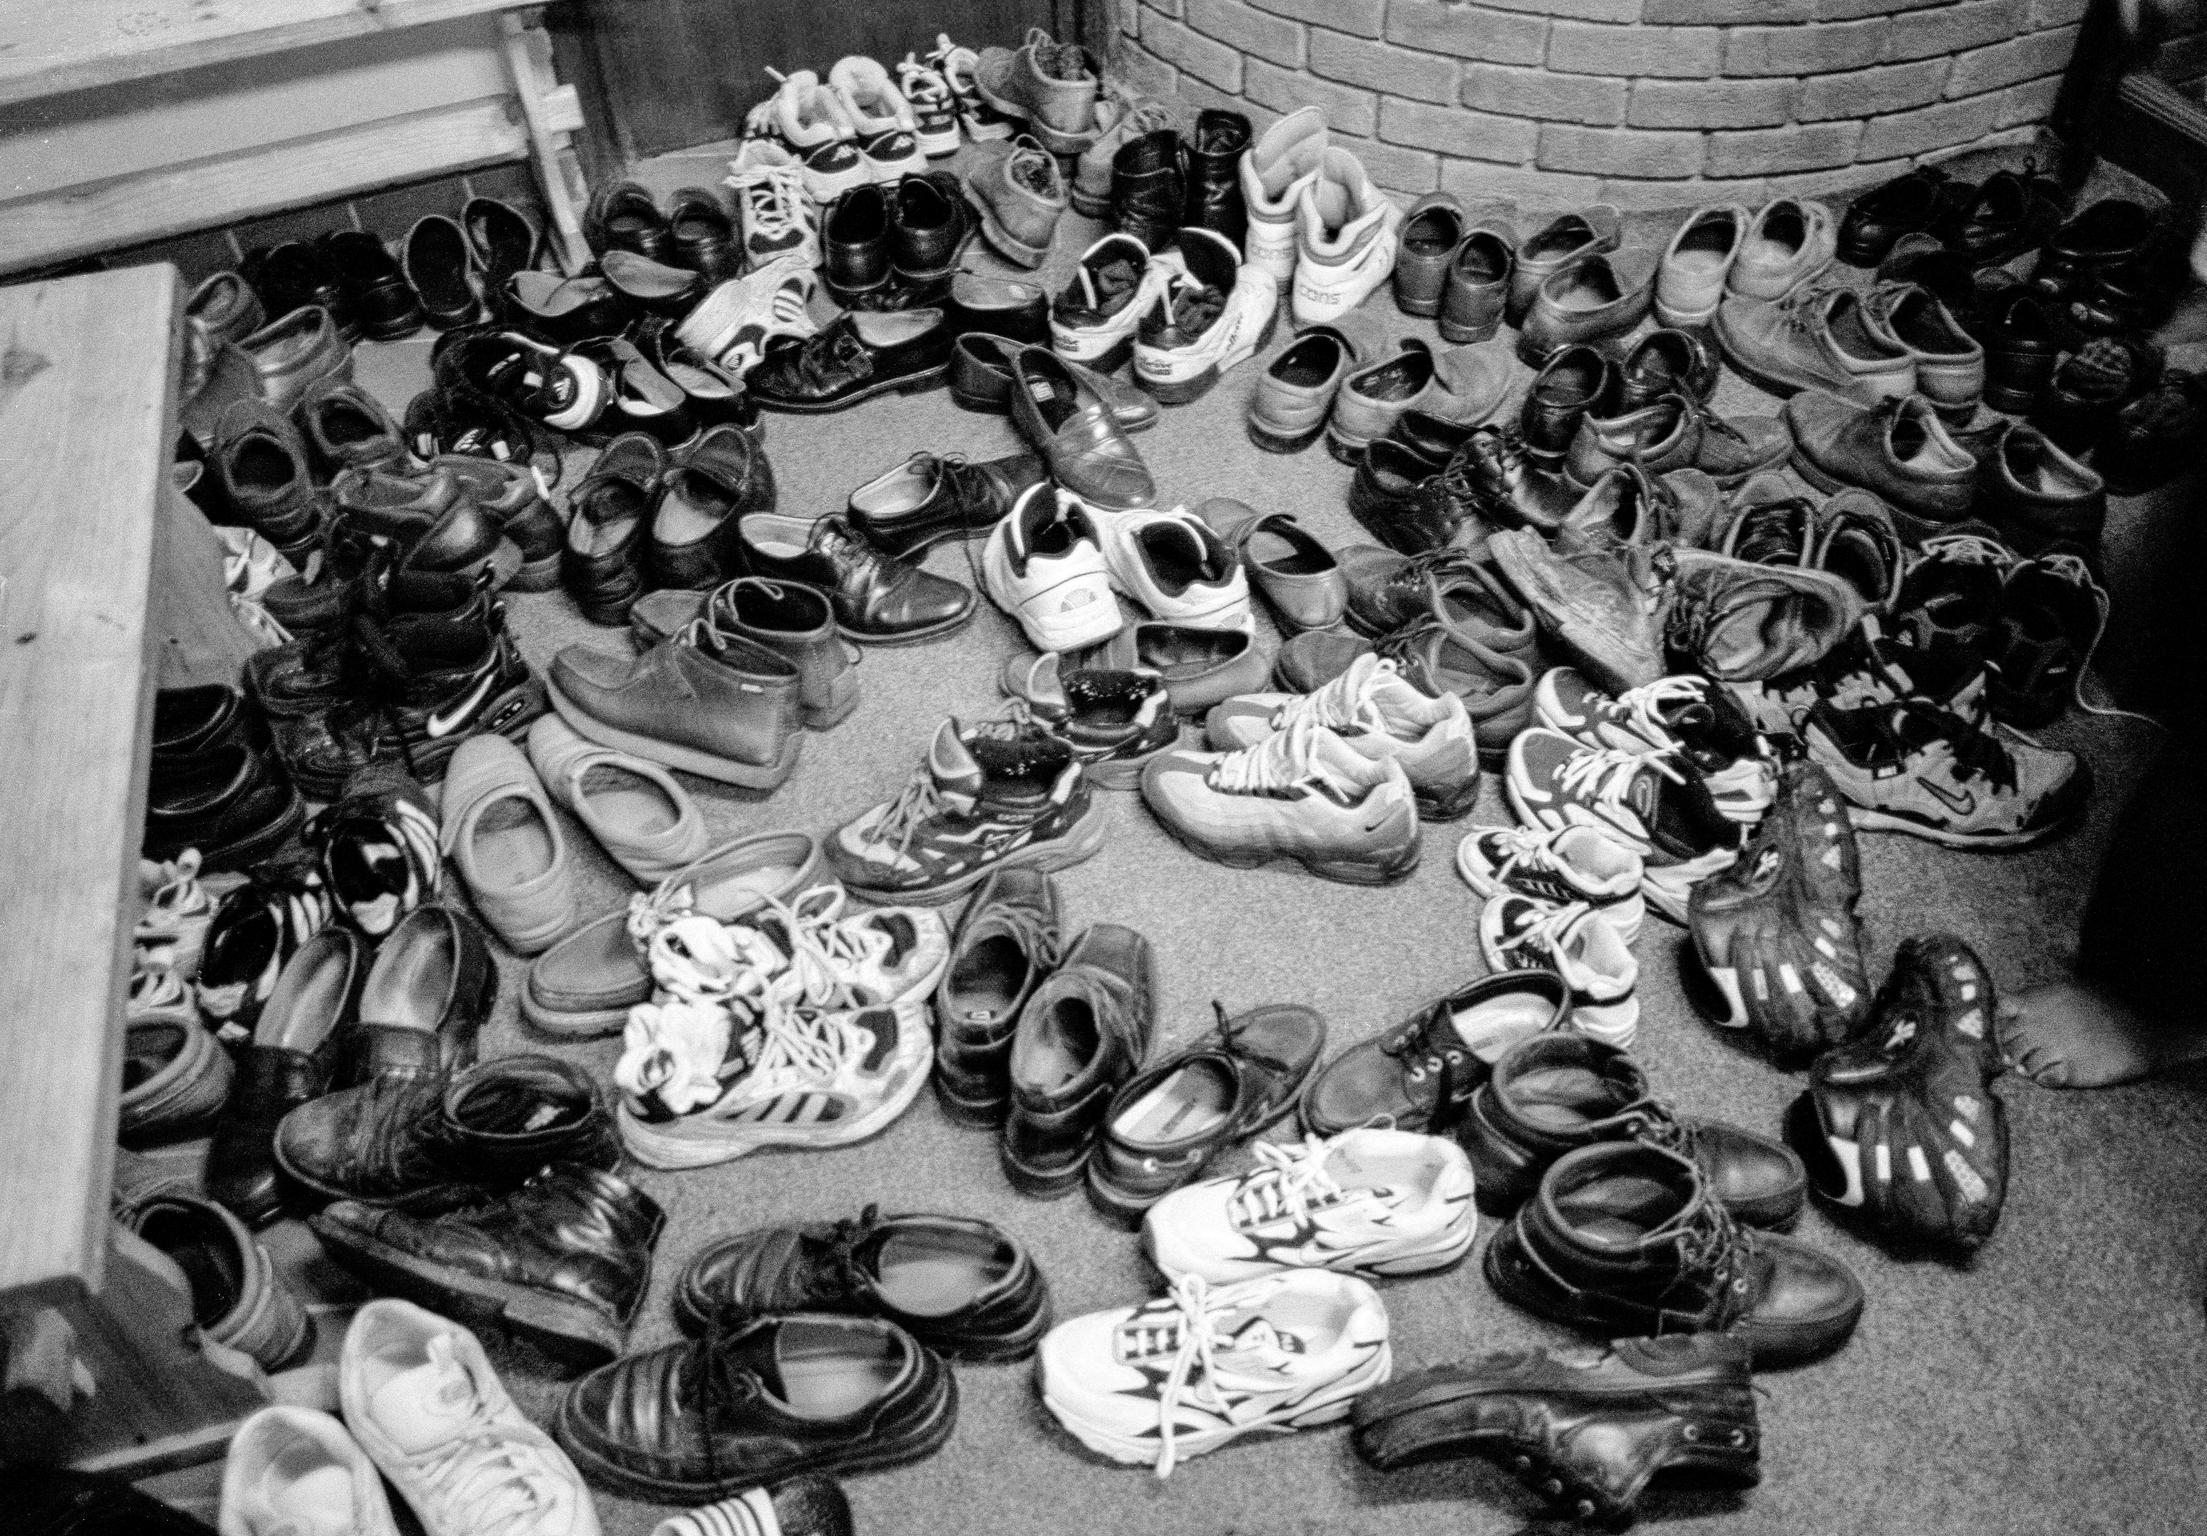 The shoes of the faithful, inside the Alice Street Mosque, Butetown. Cardiff, Wales